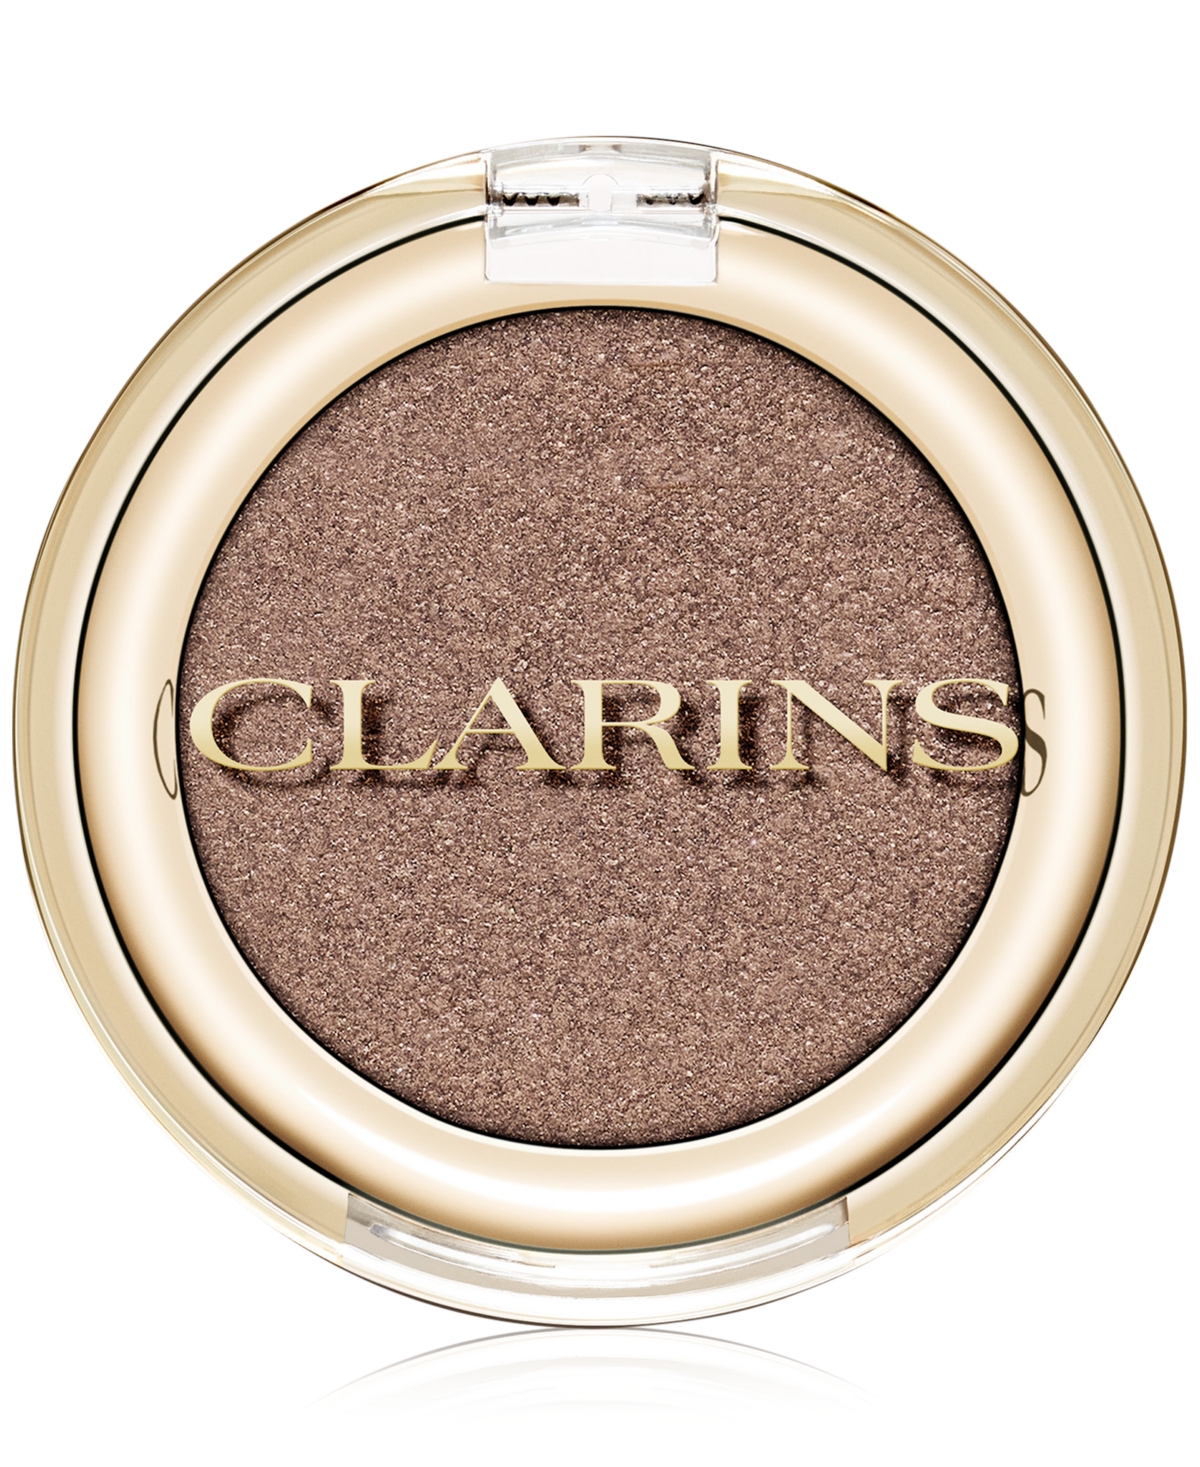 Clarins Ombre Skin Highly Pigmented & Crease-proof Eyeshadow In Satin Taupe